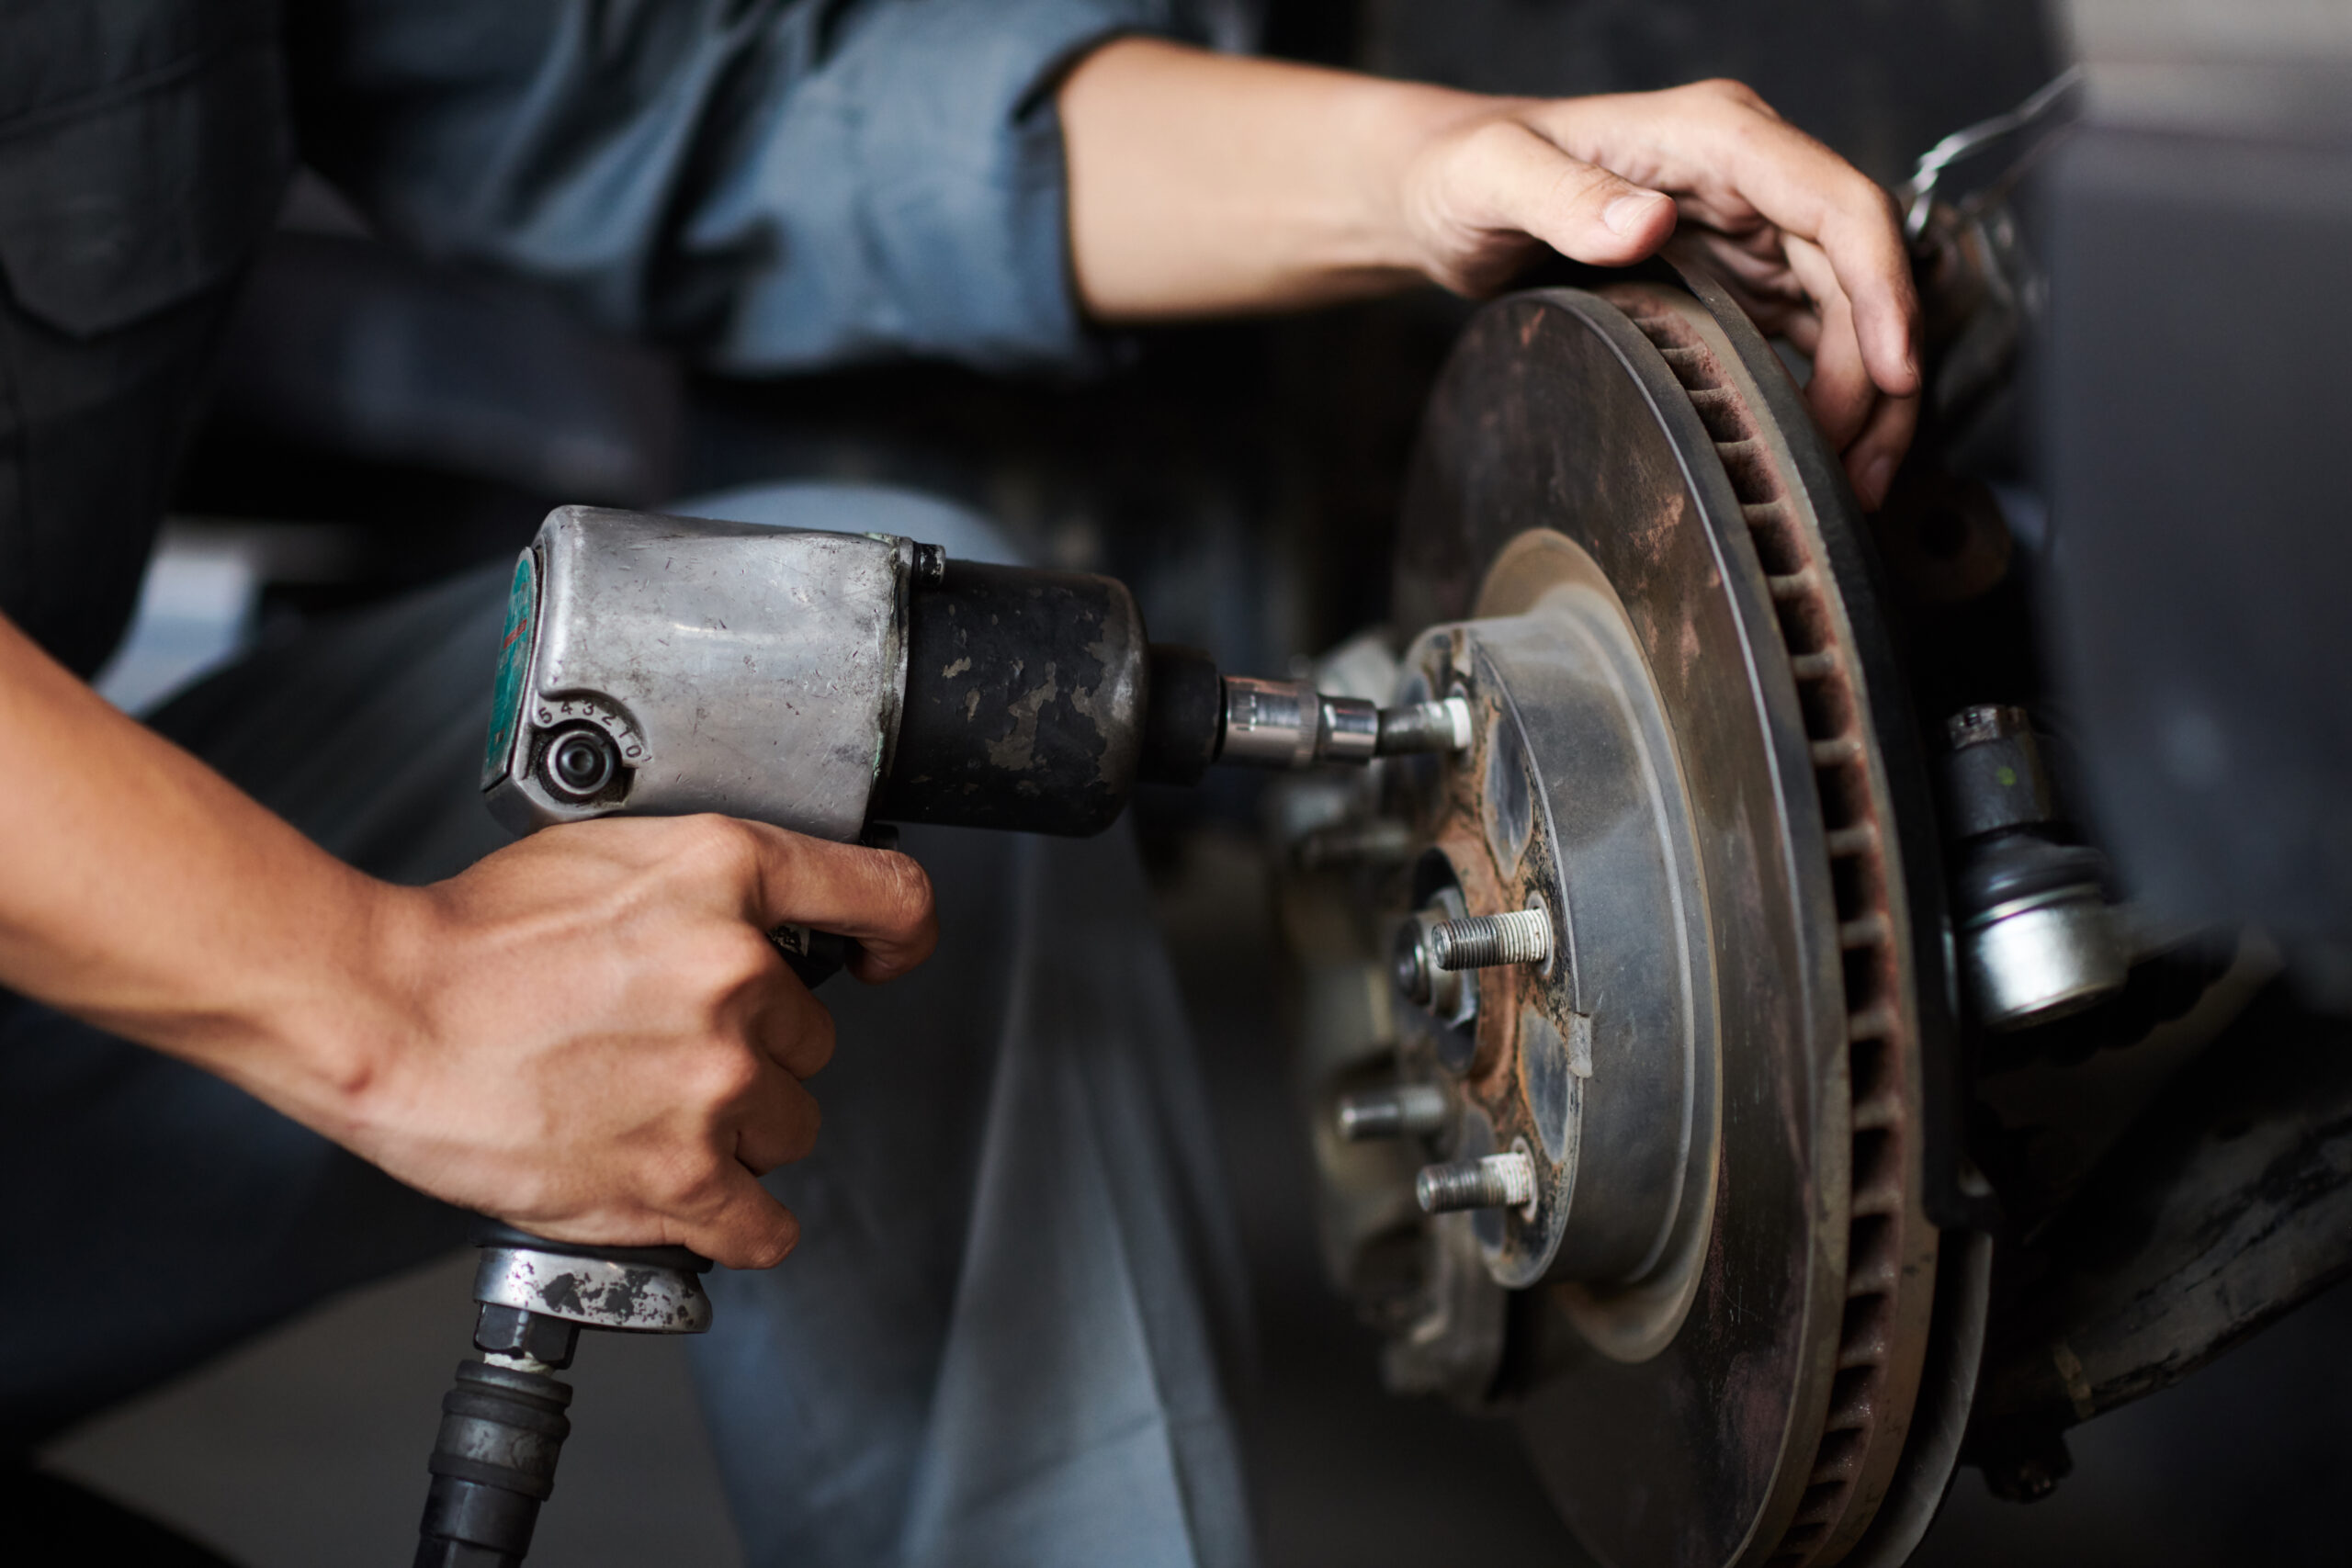 A close-up photo of a mechanic's hands changing a car tire. The mechanic is wearing gloves and using a tire iron to remove the lug nuts. The tire is flat and the rim is dirty.